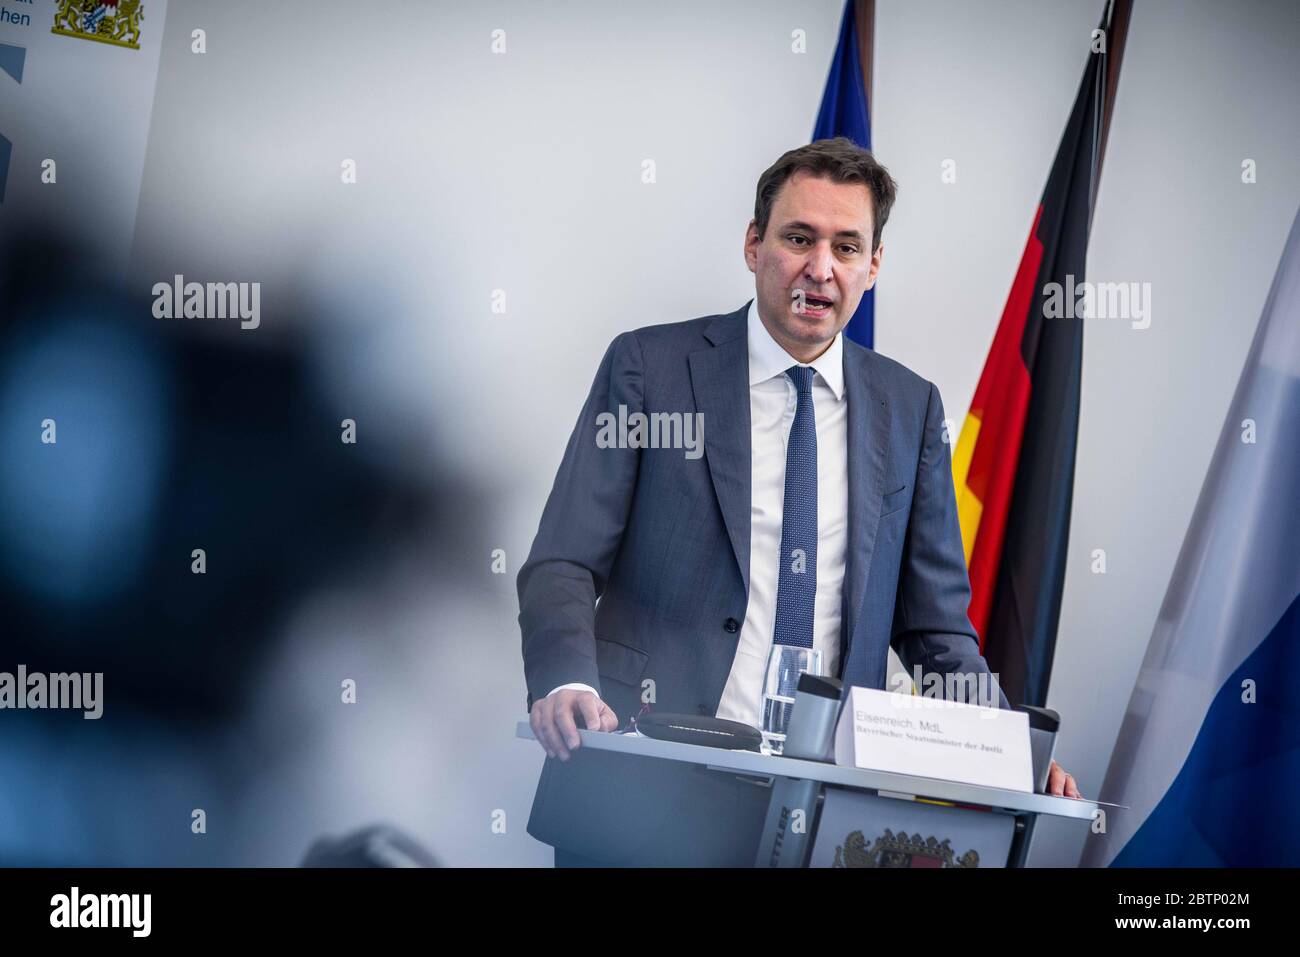 Munich, Bavaria, Germany. 27th May, 2020. Justizminister of Bavaria GEORG EISENREICH. Due to a rise of anti-Semitic activities and crimes throughout Germany and specifically over 300 in Bavaria alone, the Bavarian Justizminister has issued a warning regarding the spreading of anti-semitic conspiracy theories, Holocaust relativization via the protests against the anti-Corona protests. Due to this, the Oberstaatsanwalt (head state attorney) Andreas Franck has produced a manual entitled 'Antisemitische Straftaten erkennen'' (Recognize Antisemitic Crimes) which Justizminister Georg Eisenreich Stock Photo